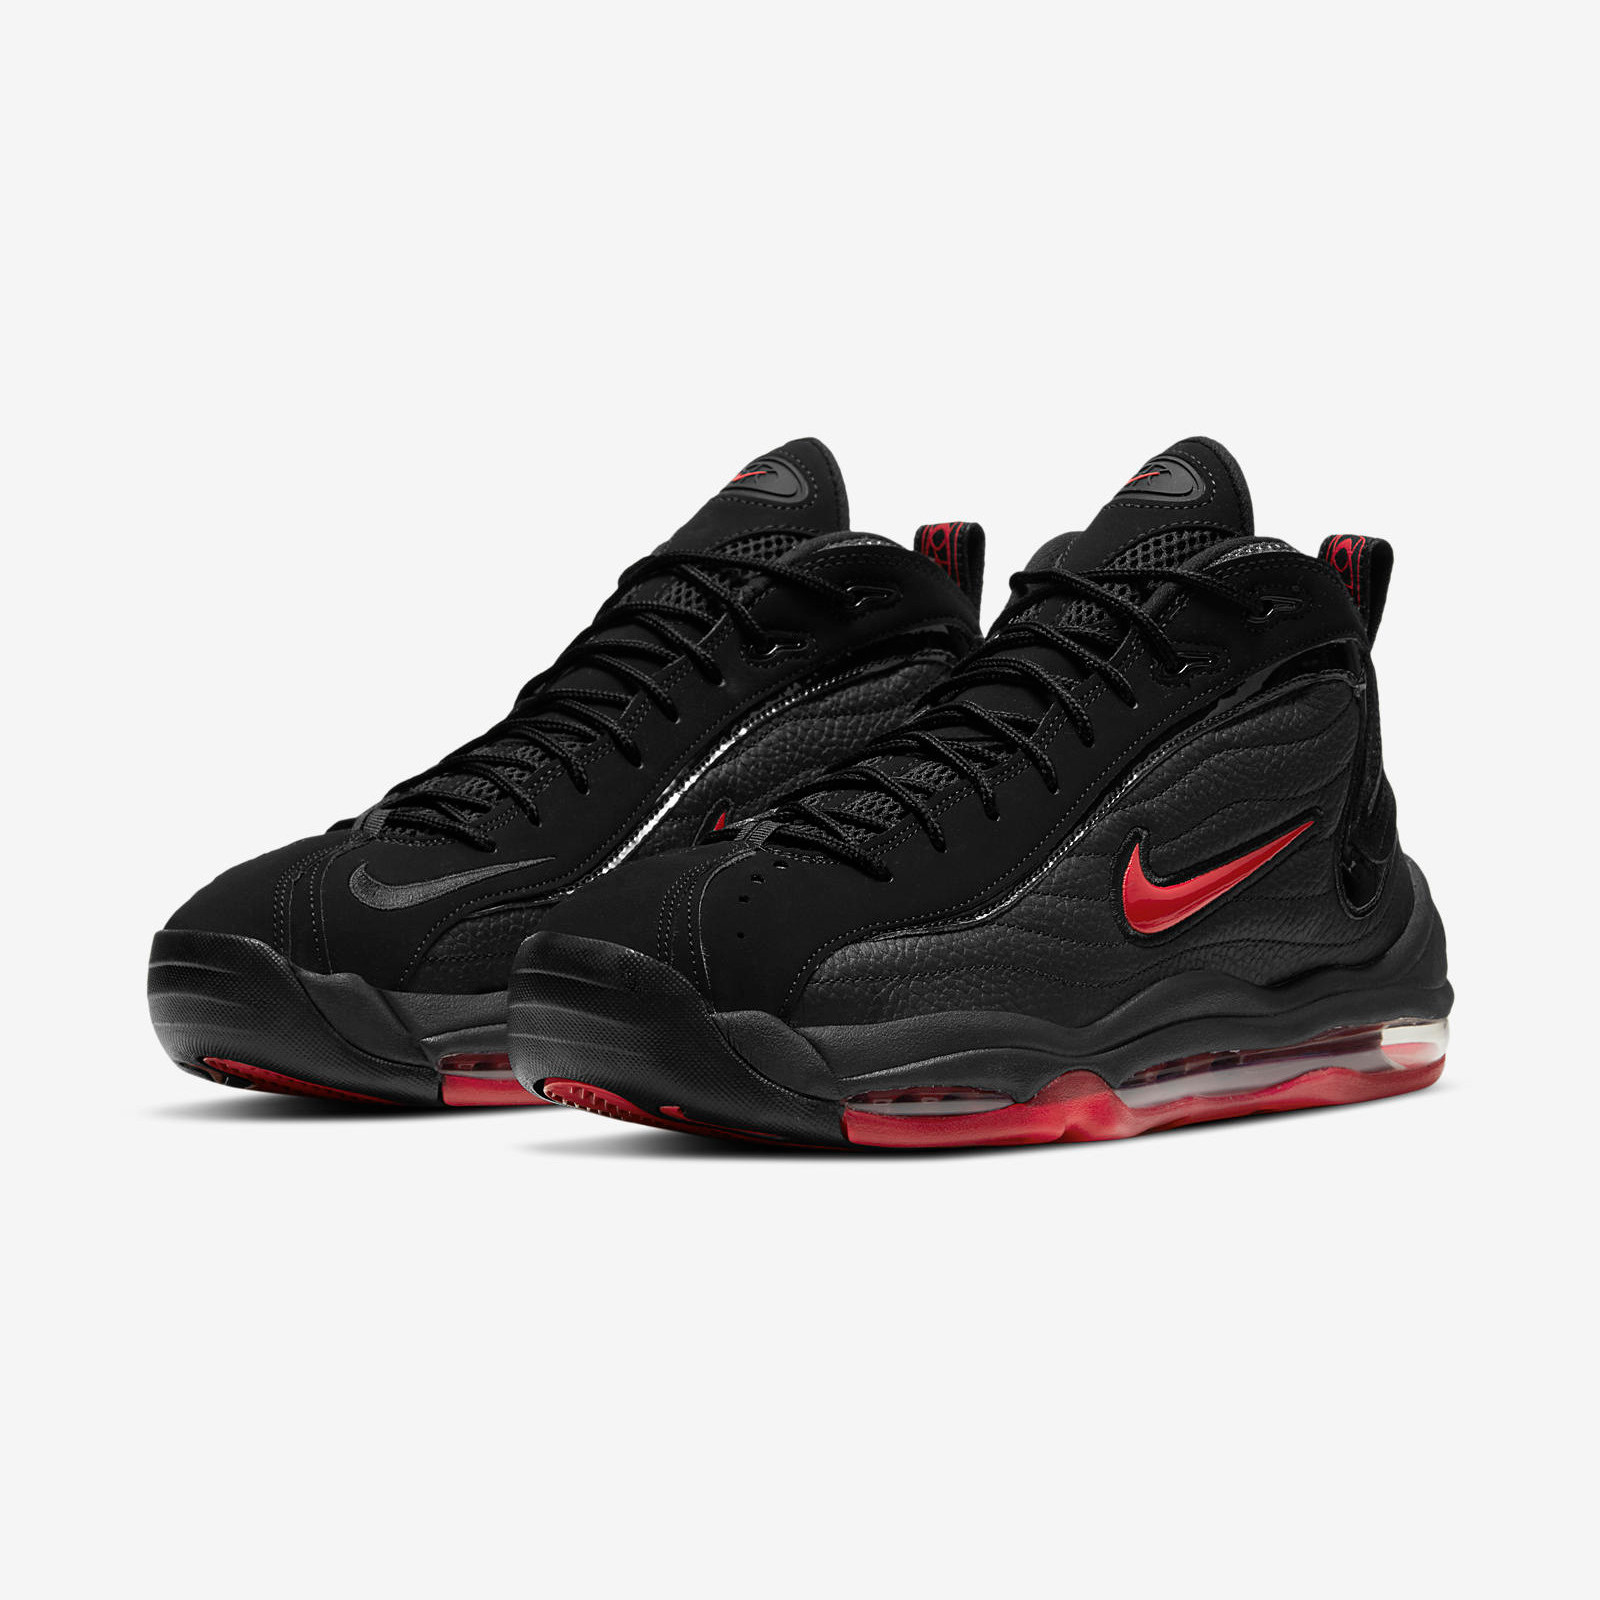 Nike Air Total Max
Uptempo Bred